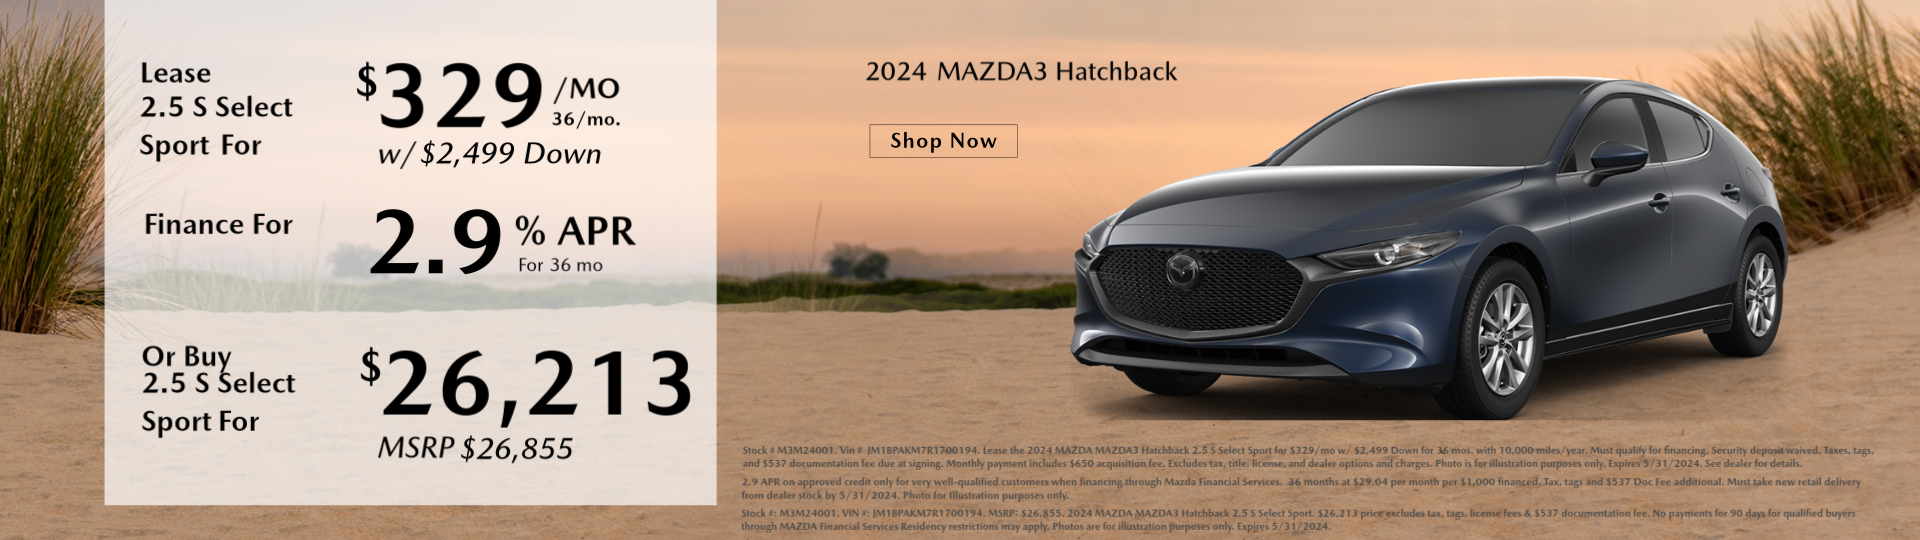 Don't miss our New MAZDA3 Hatchback Offers at Chapman Mazda New Jersey!